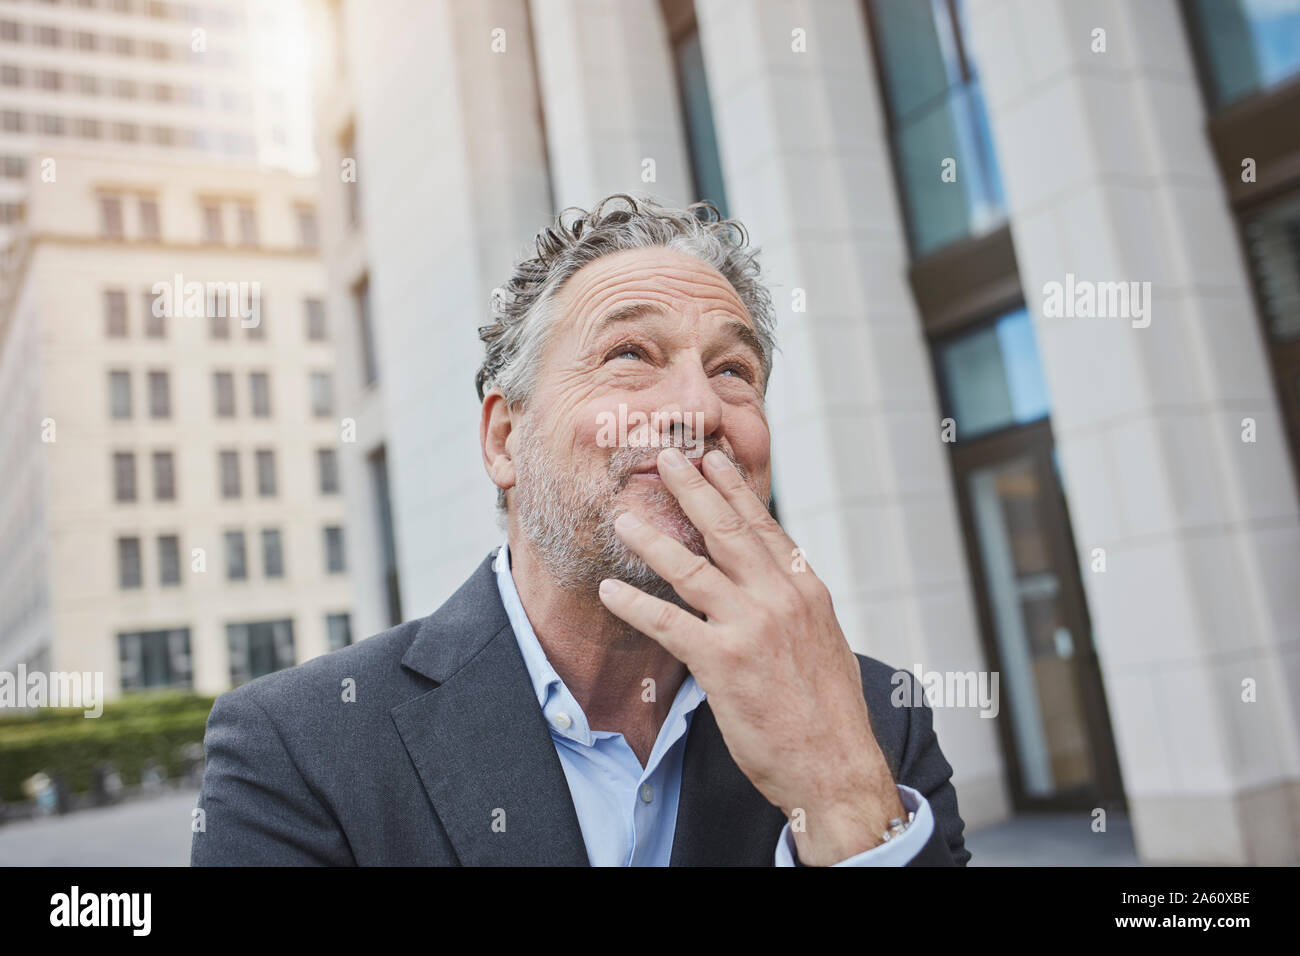 Portrait of happy businessman in the city looking up Stock Photo